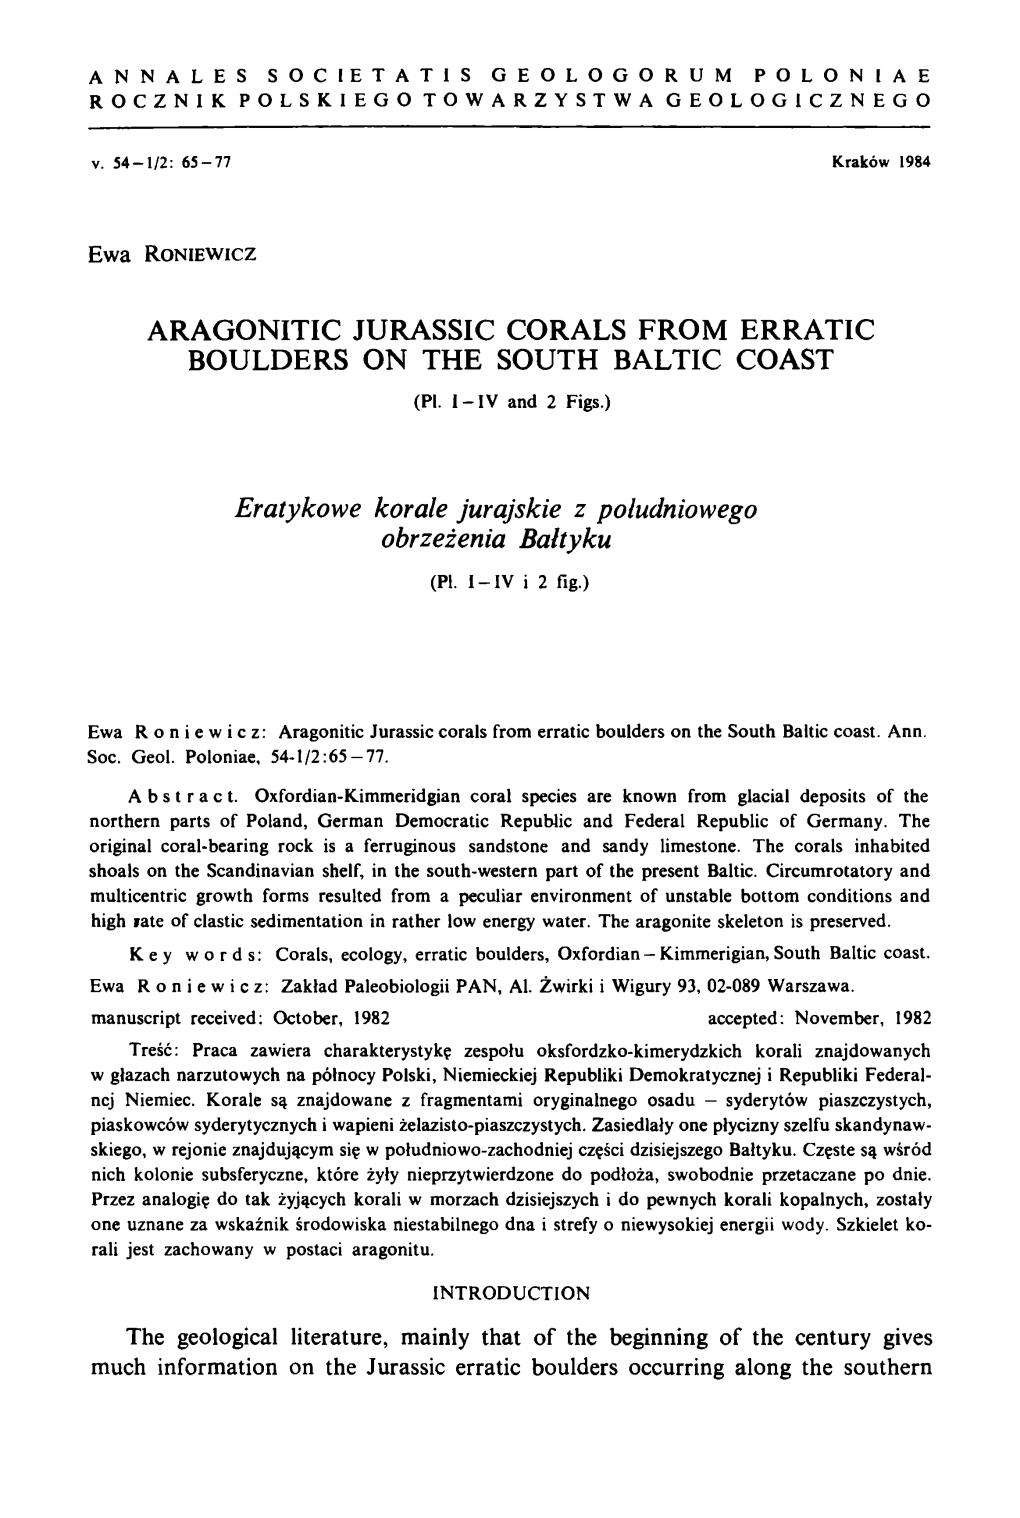 Aragonitic Jurassic Corals from Erratic Boulders on the South Baltic Coast (Pi